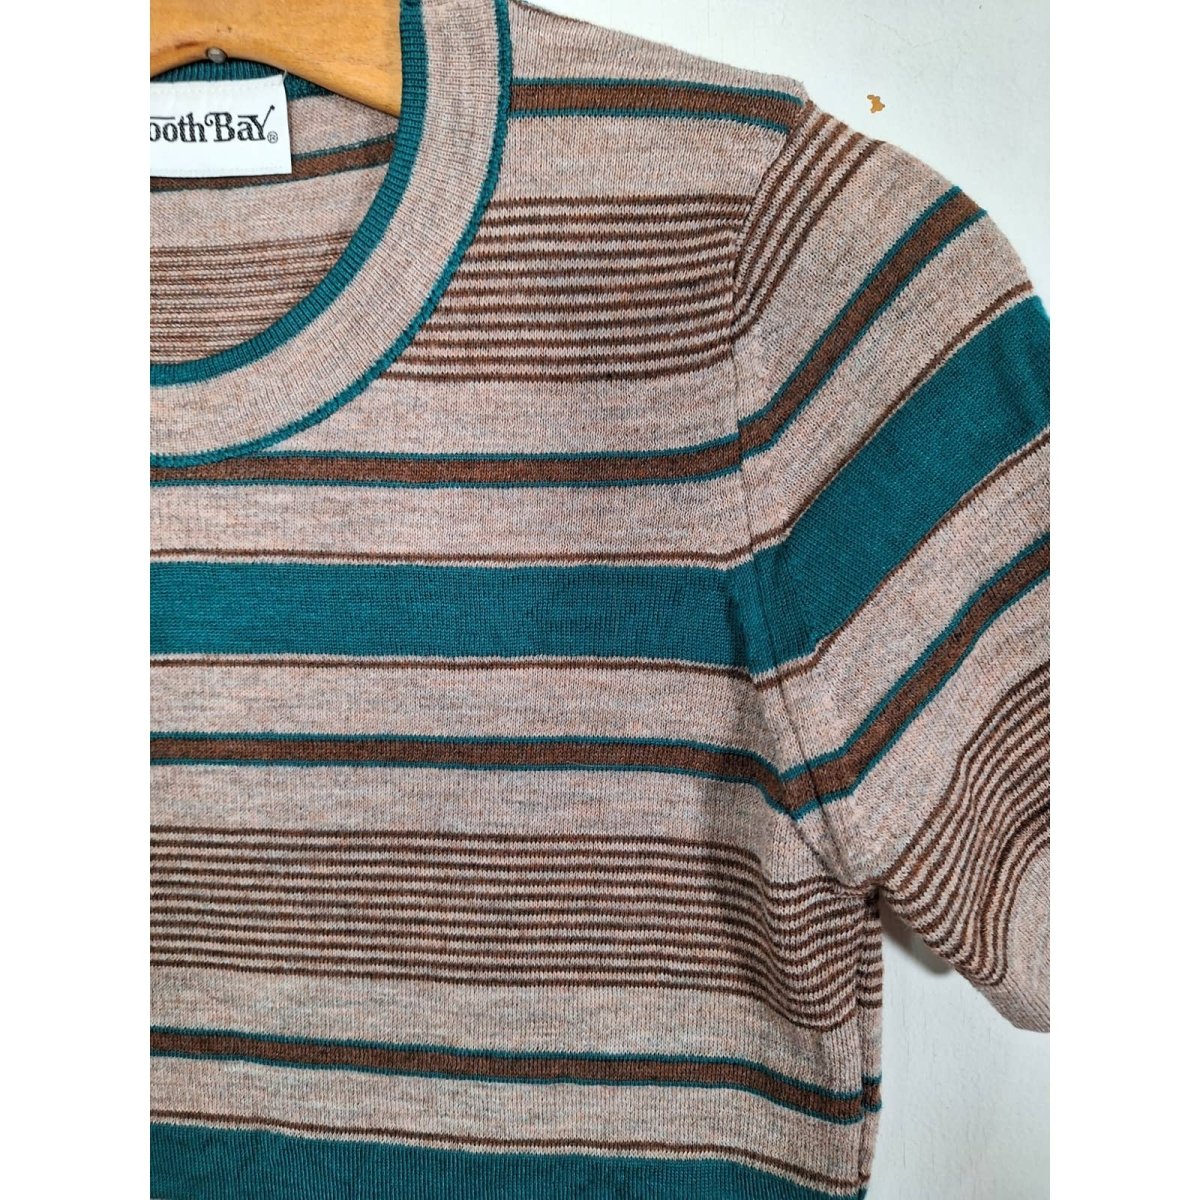 70s Big Kids Striped Fitted Shirt Size Large 12/14 Adult XS/S - themallvintage The Mall Vintage